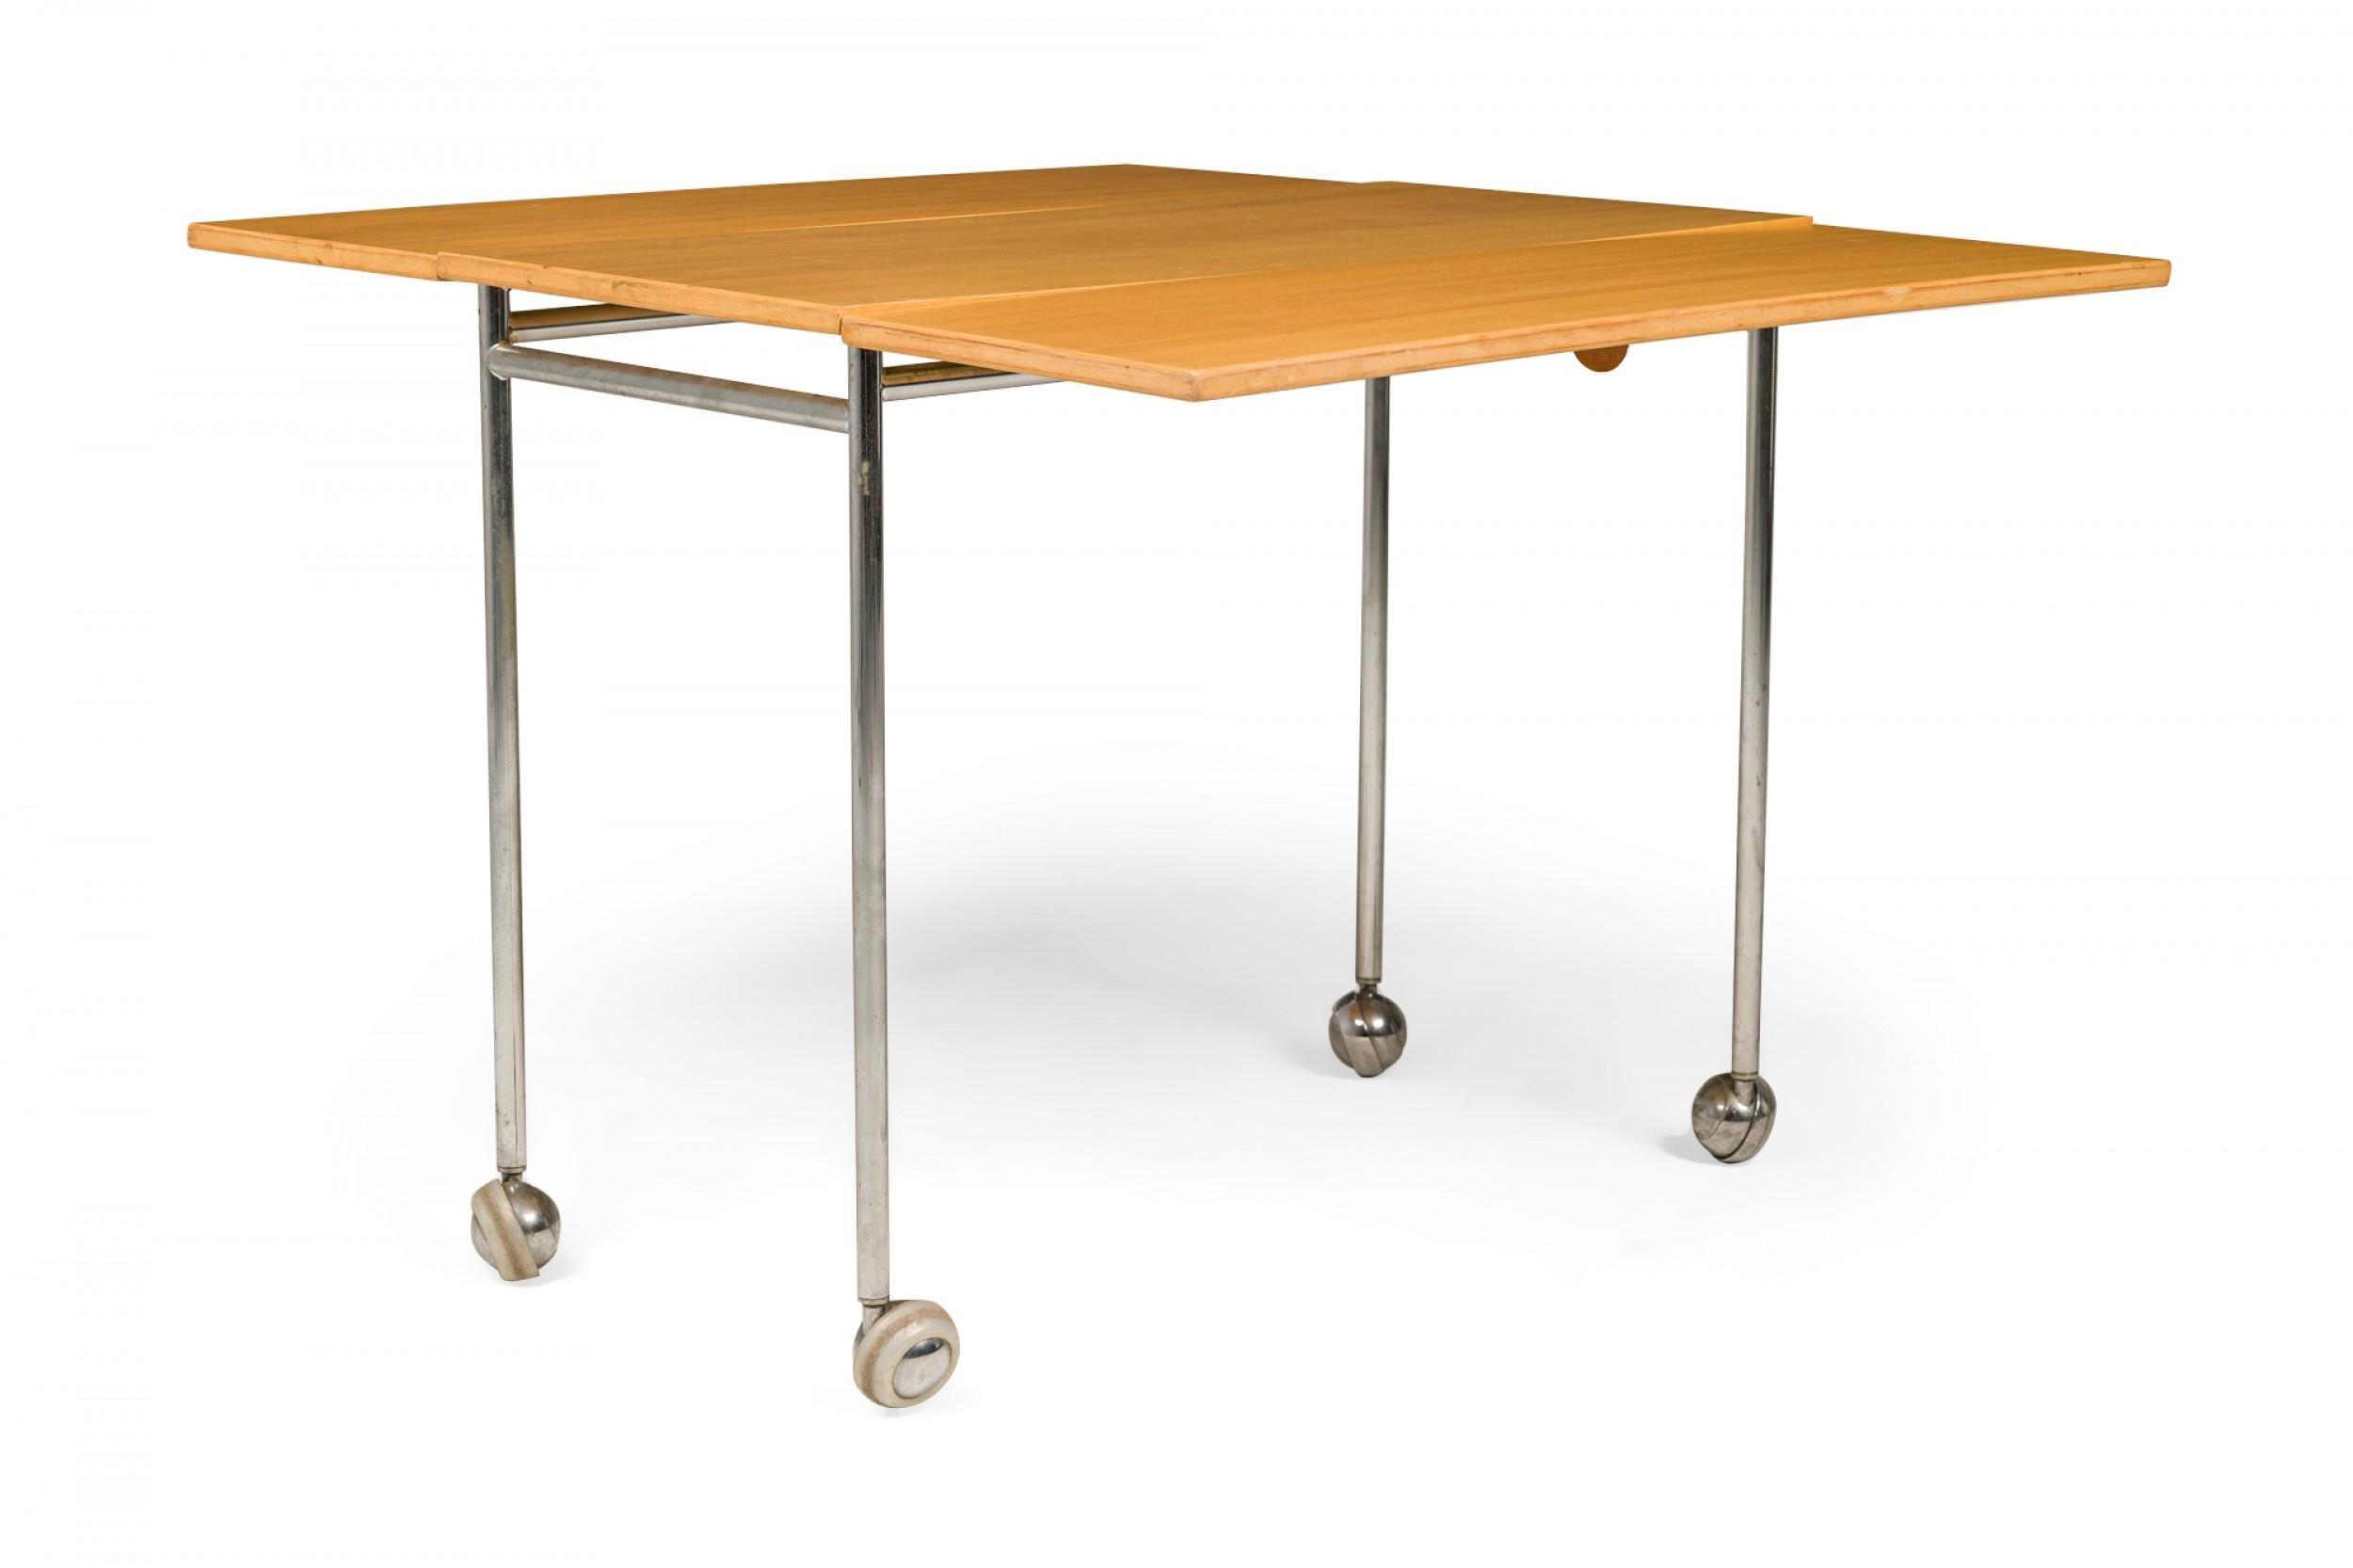 Swedish Mid-Century rectangular drop leaf work table with a rectangular wooden top and leaves resting on a steel frame with four legs ending in casters. (BRUNO MATHSSON)
